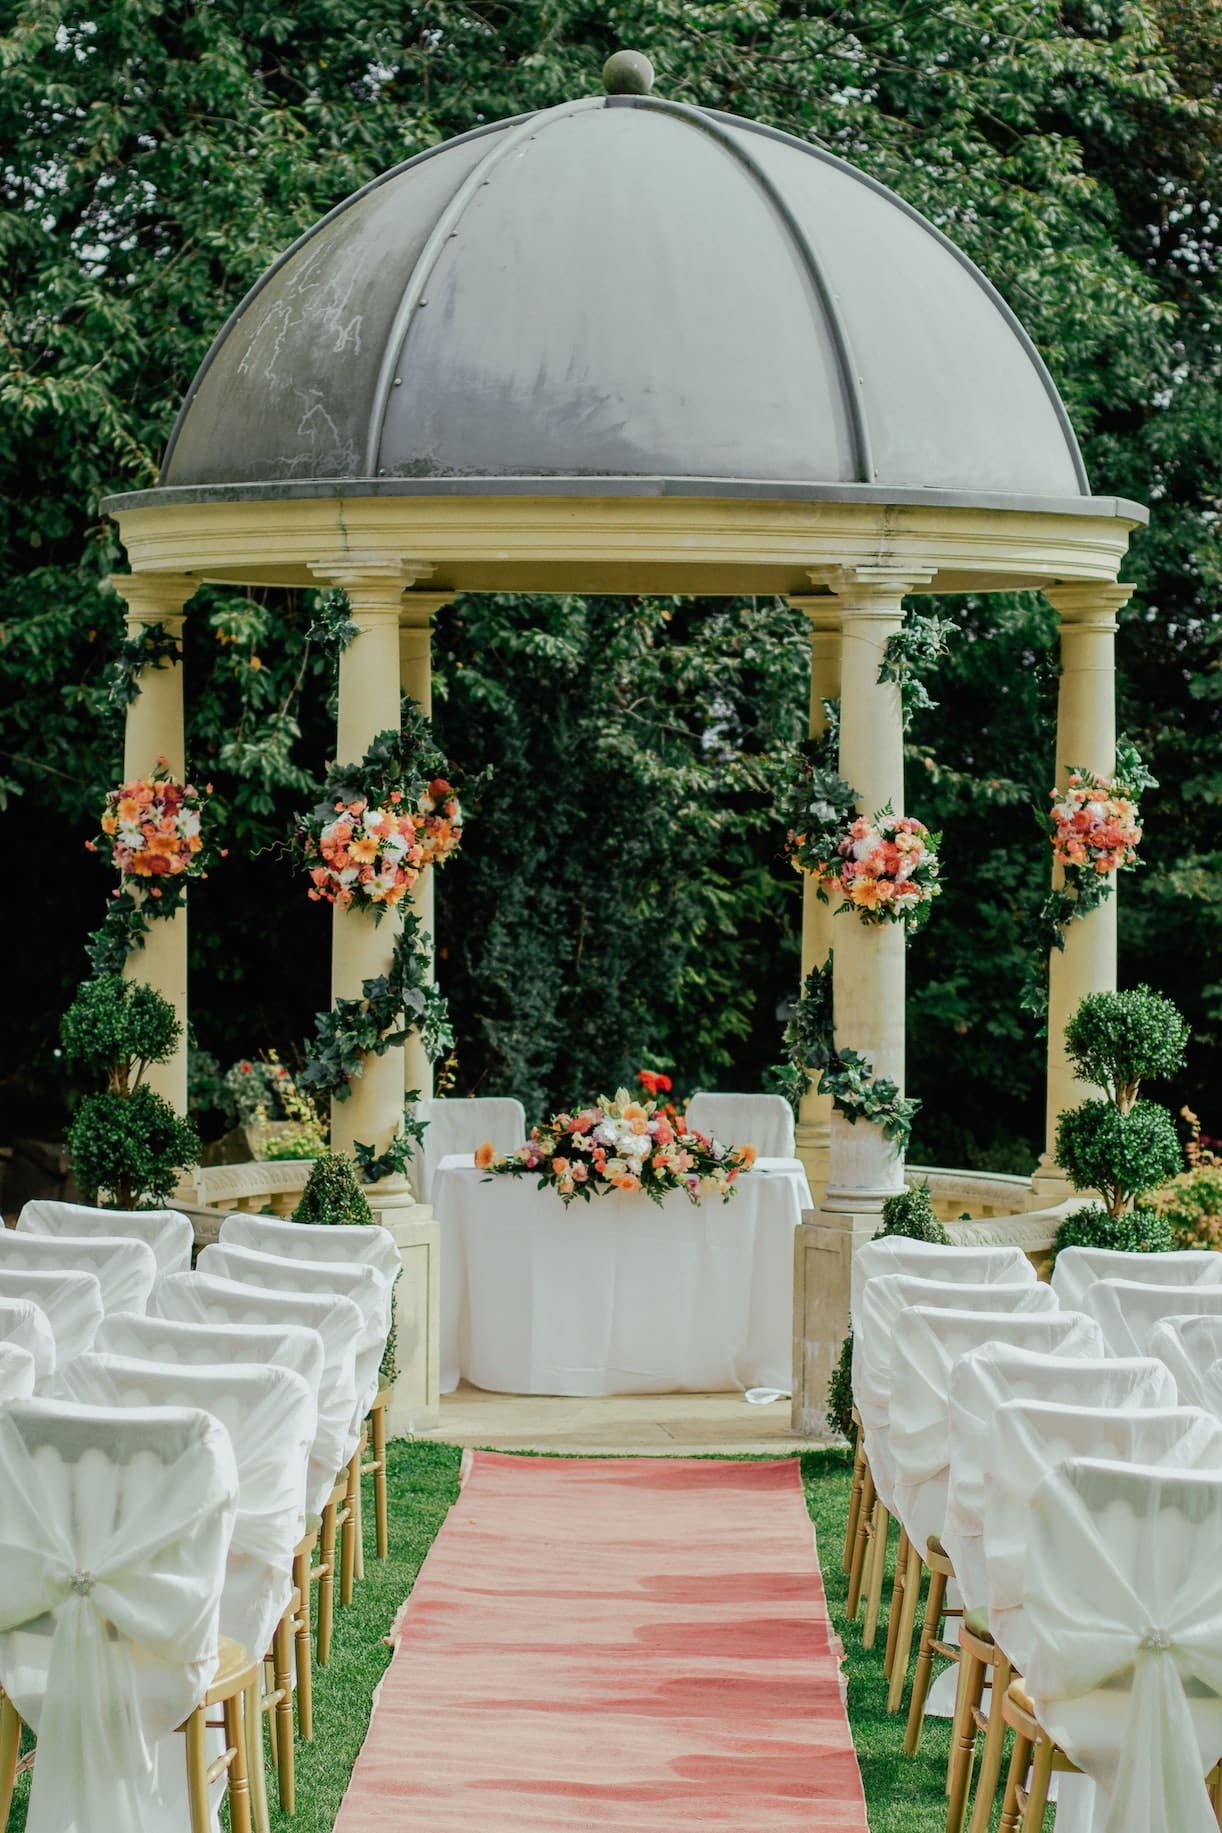 Questions to Ask Wedding Venue Before Booking | Gazebo with Flowers